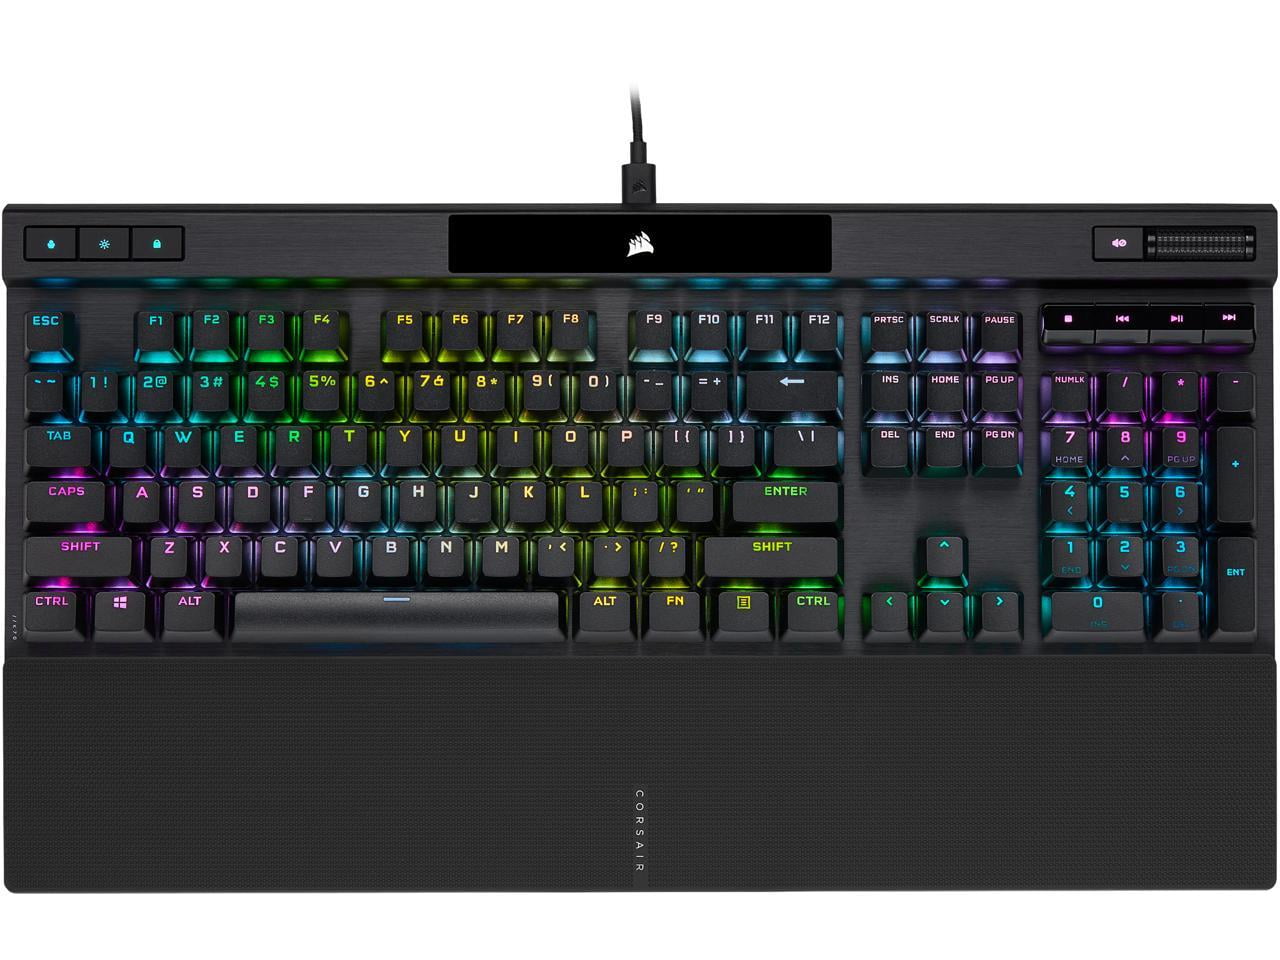 Meander Fem Forberedende navn Corsair K70 RGB PRO Wired Mechanical Gaming Keyboard (Cherry MX RGB Brown  Switches: Tactile & Quiet, 8,000Hz Hyper-Polling, PBT Double-Shot PRO  Keycaps, Soft-Touch Palm Rest) QWERTY, NA - Black - Walmart.com